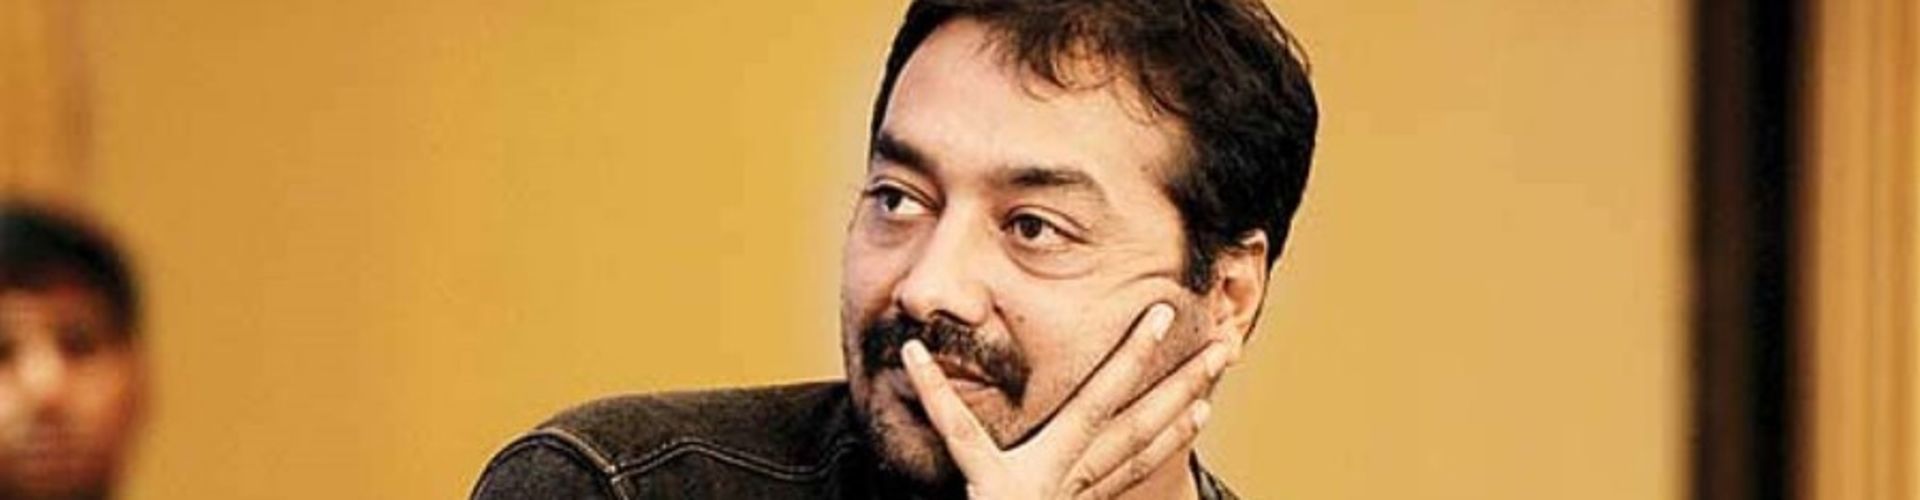 Everyone is at fault says Anurag Kashyap about sexual harassment at workplace